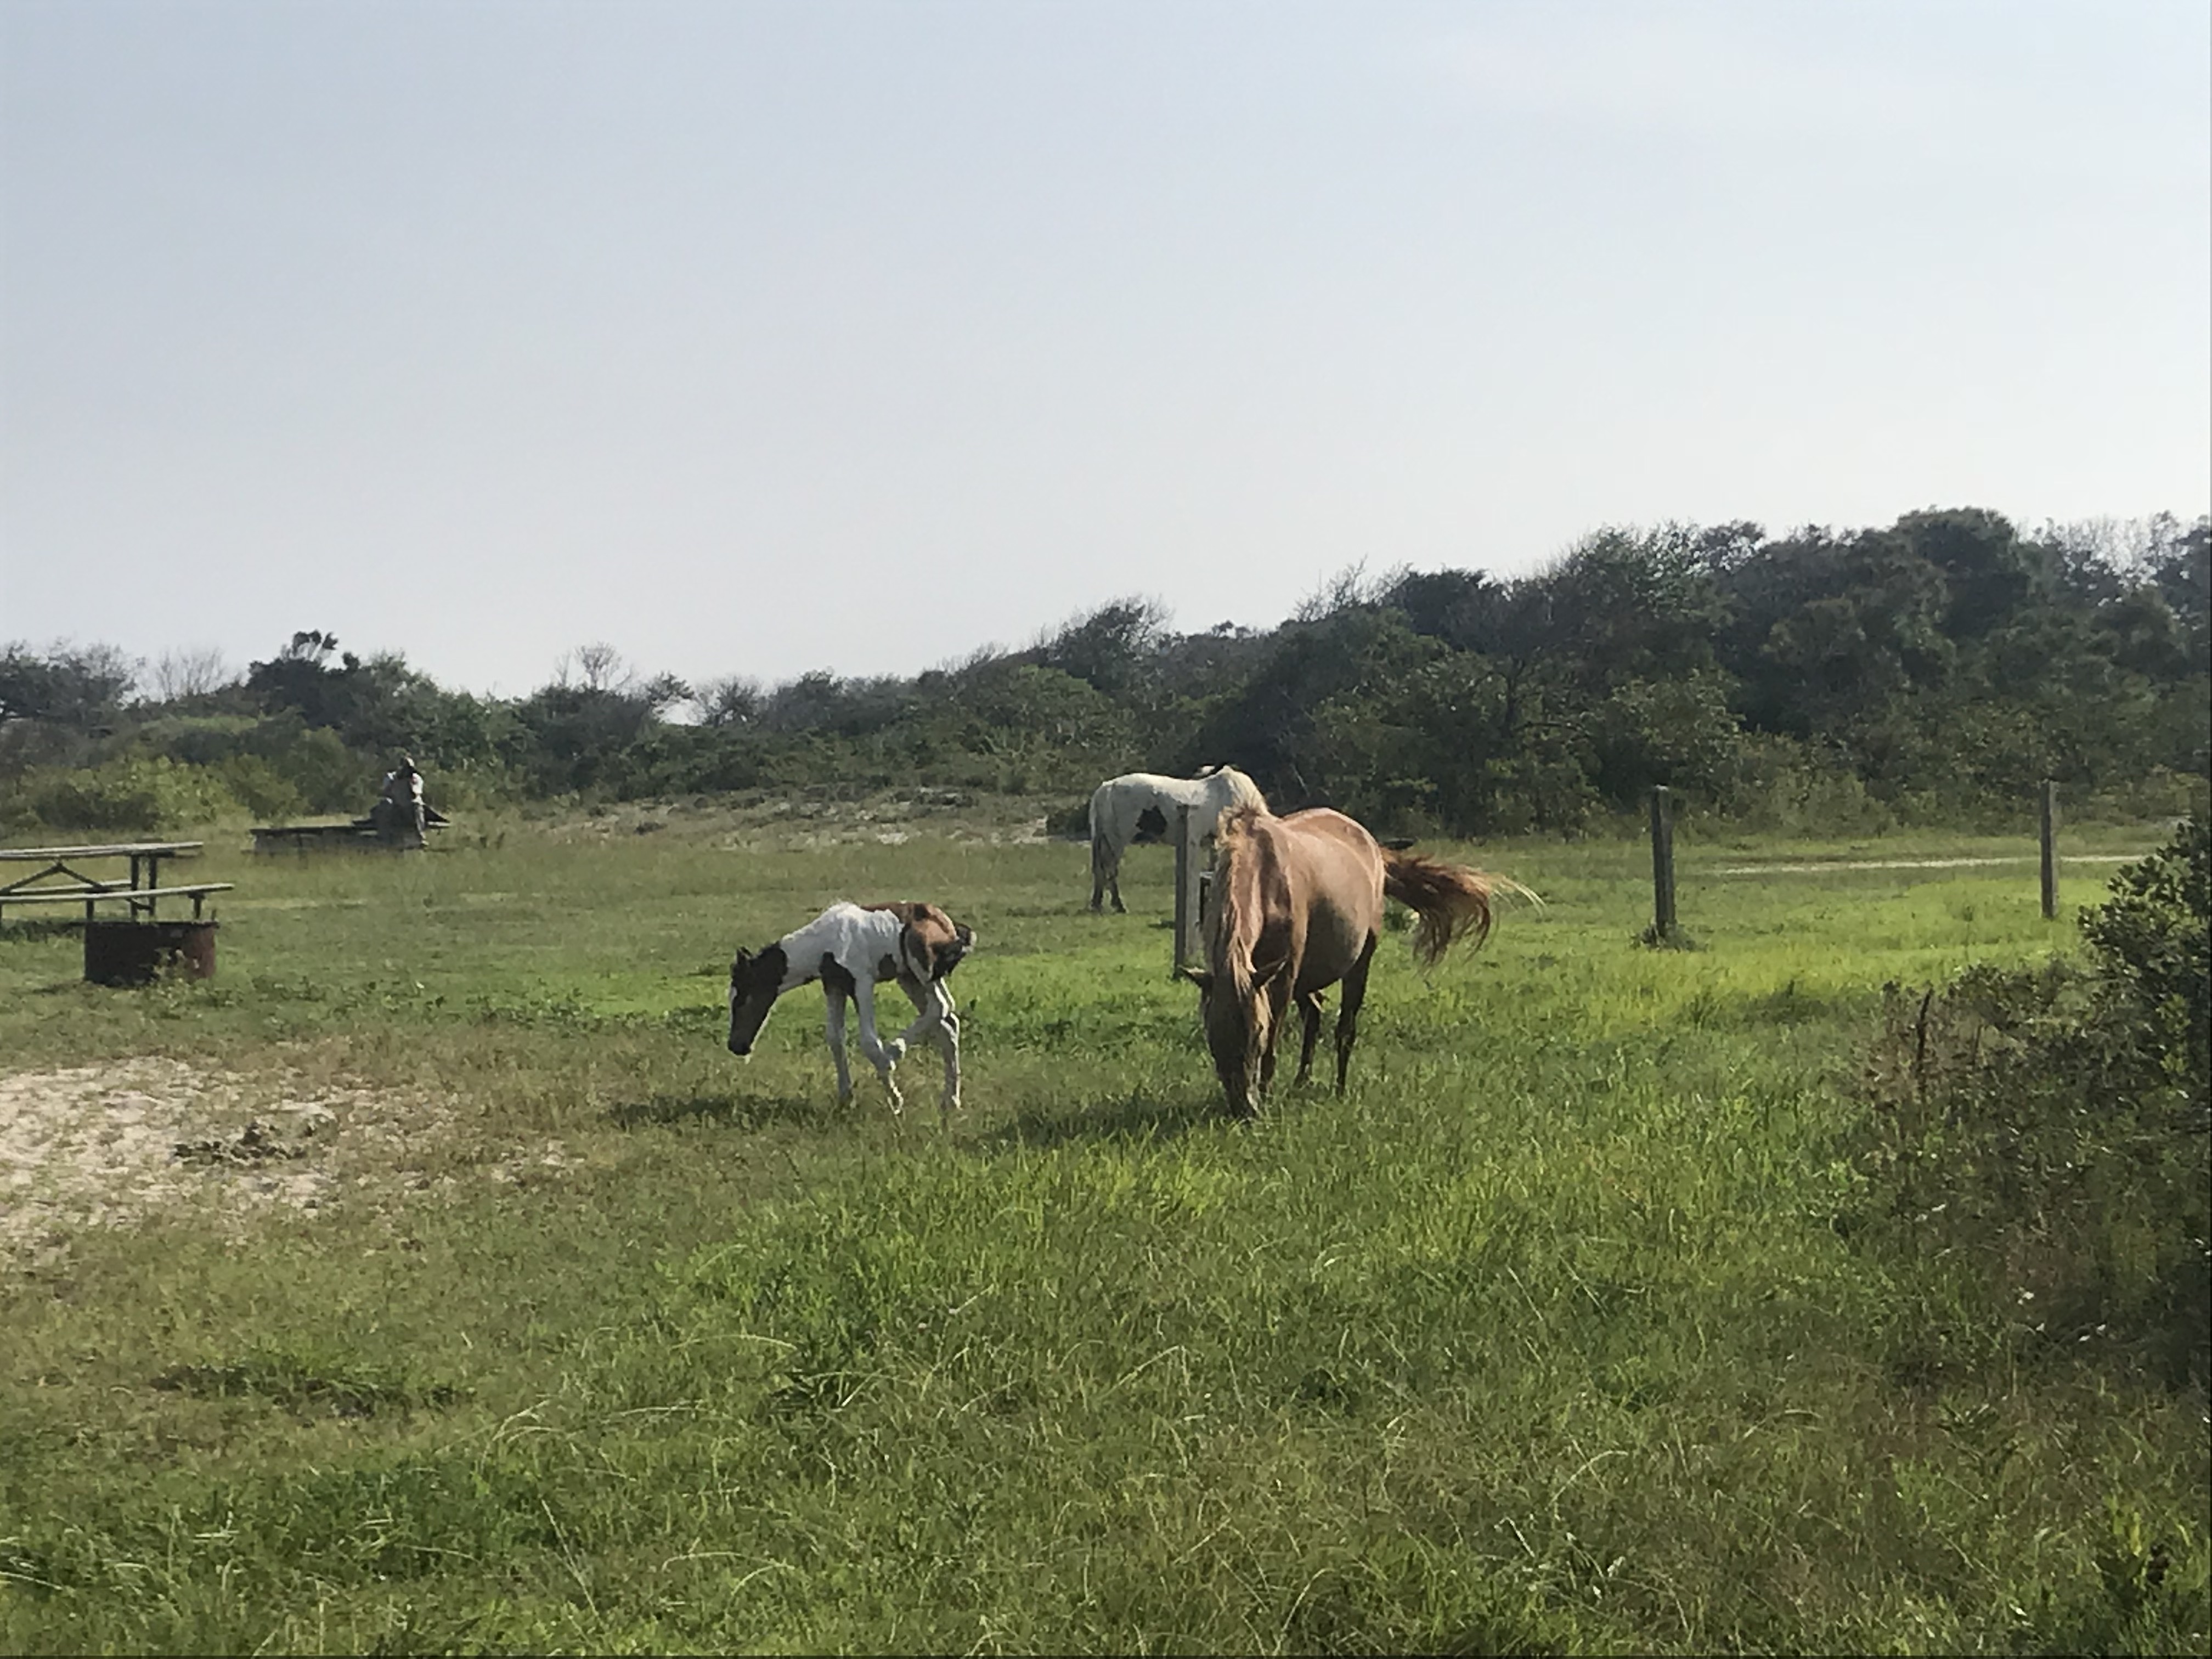 Three horses including a foal from Assateague state park